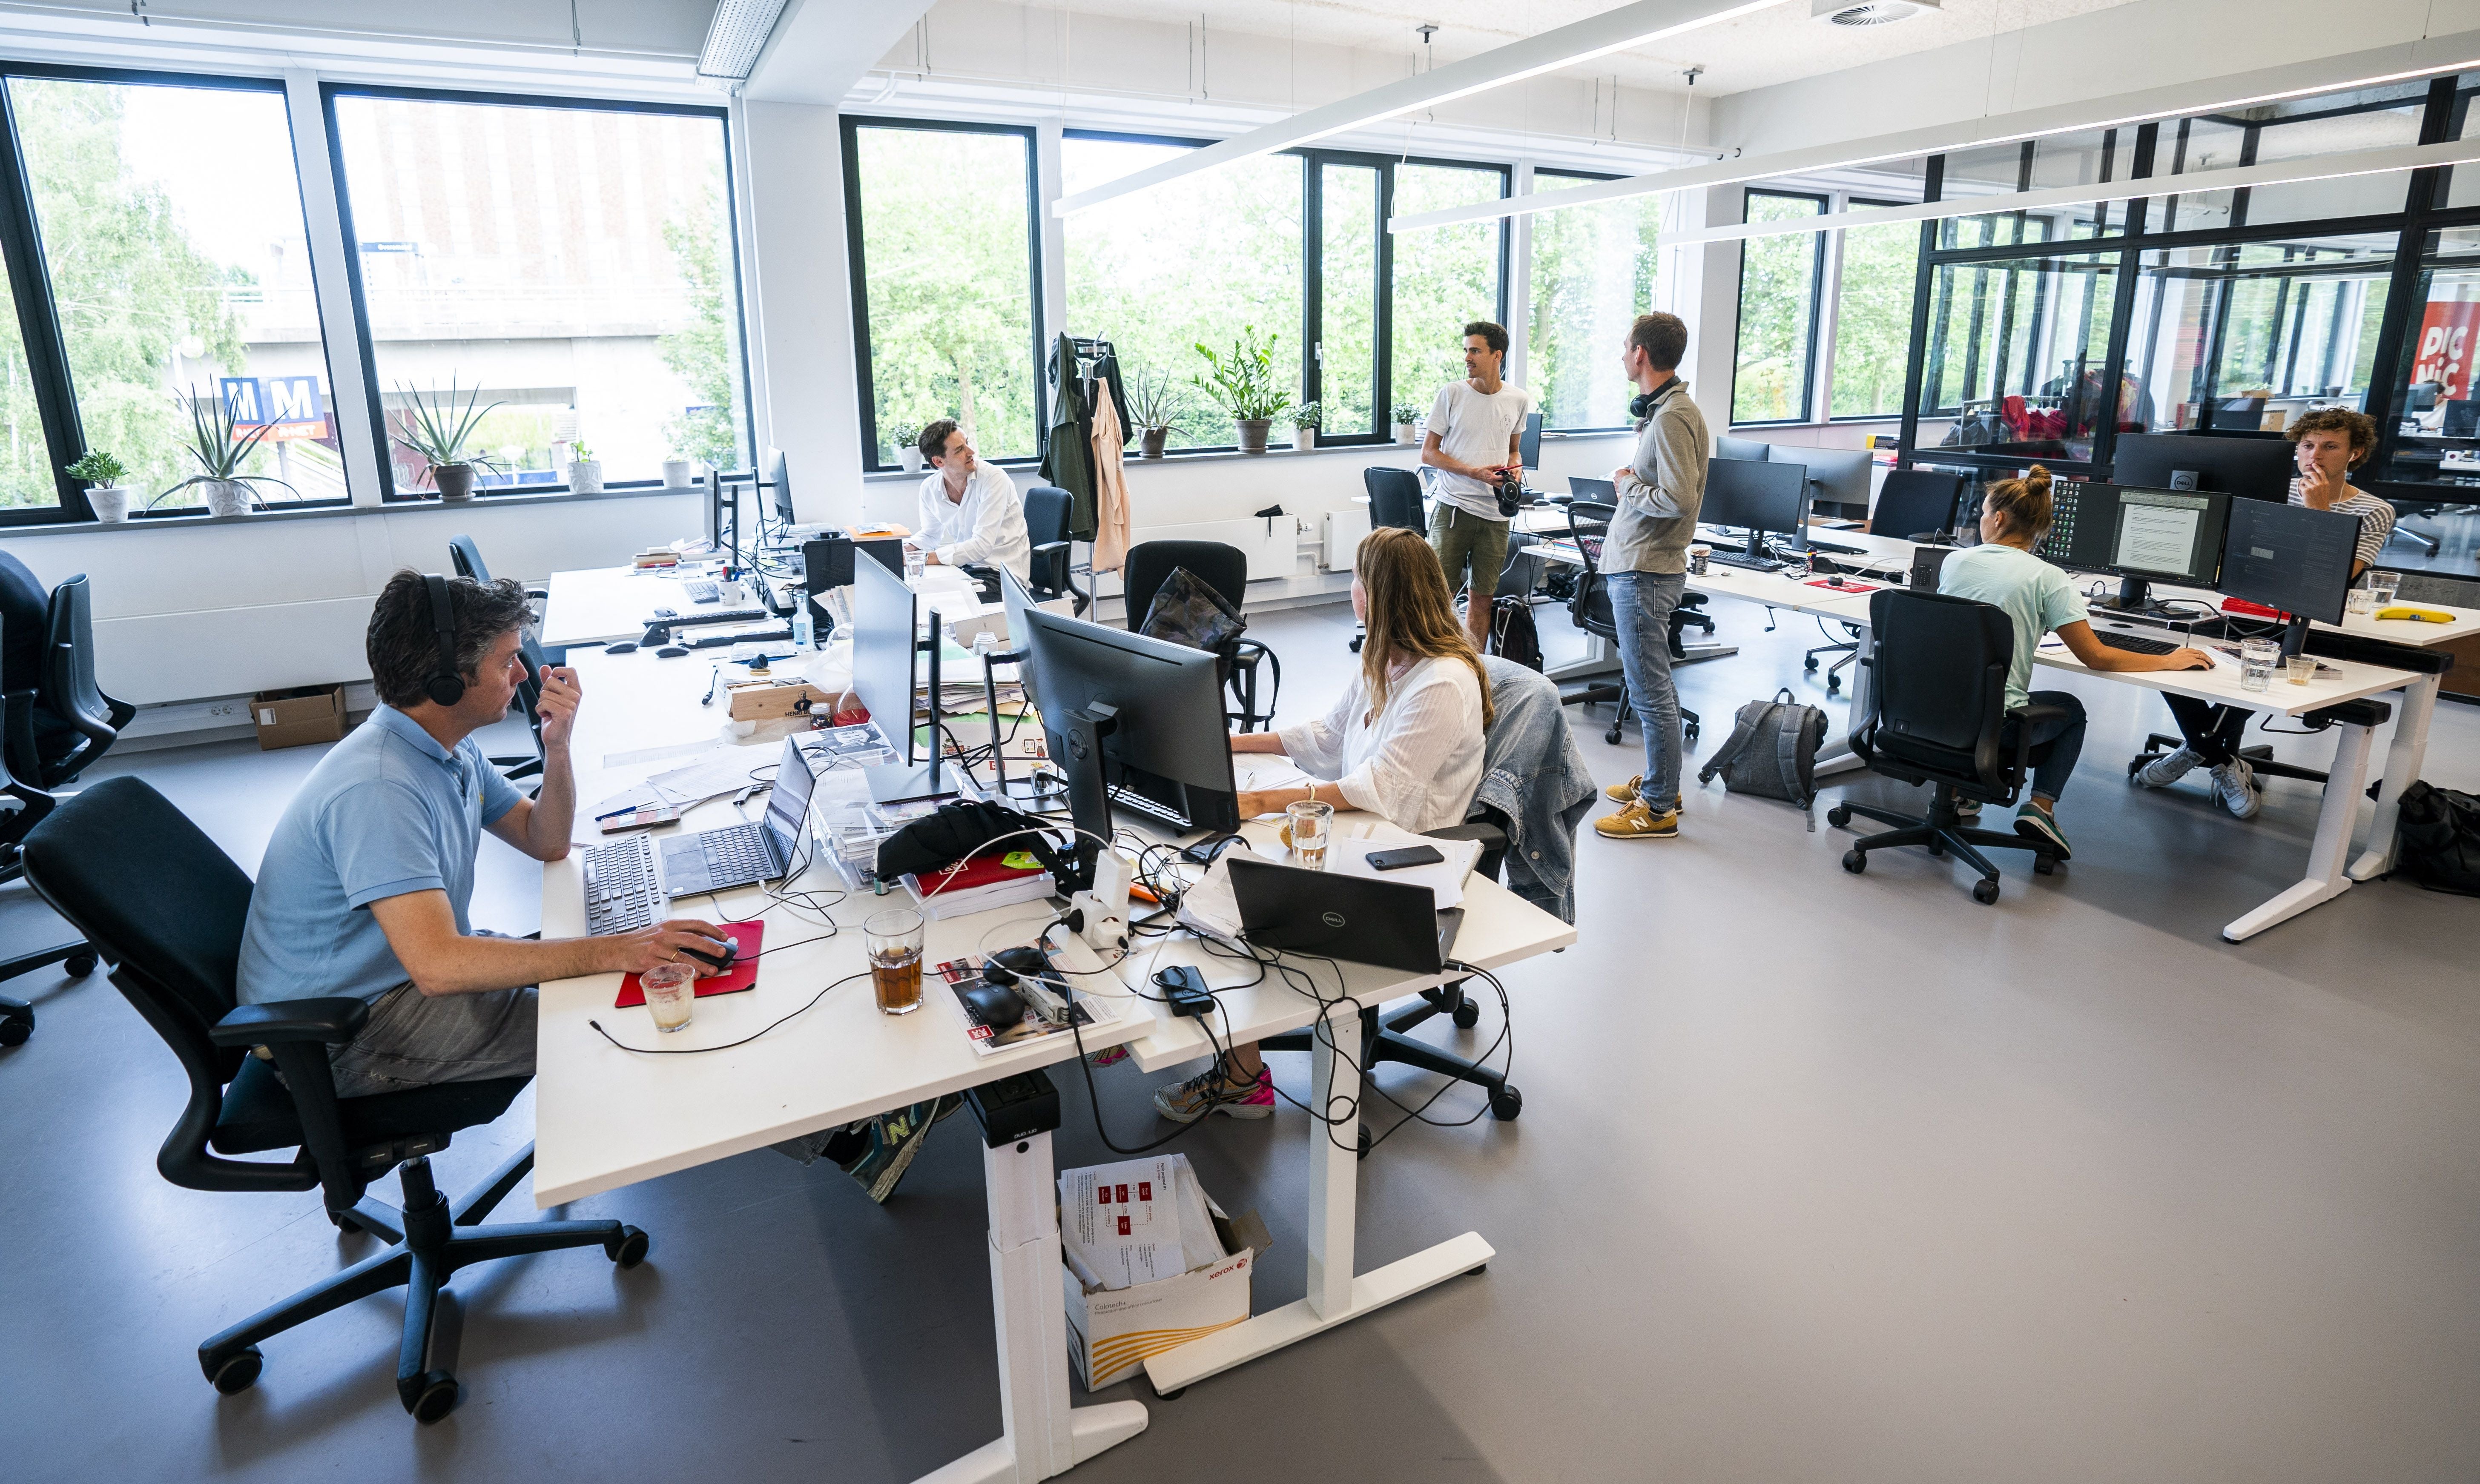 Employees at the online supermarket Picnic are seen at their desks in their office in Duivendrecht, northern Netherlands on 28 June, 2021. A recent suggests burnout is driving workers to look for new opportunities.